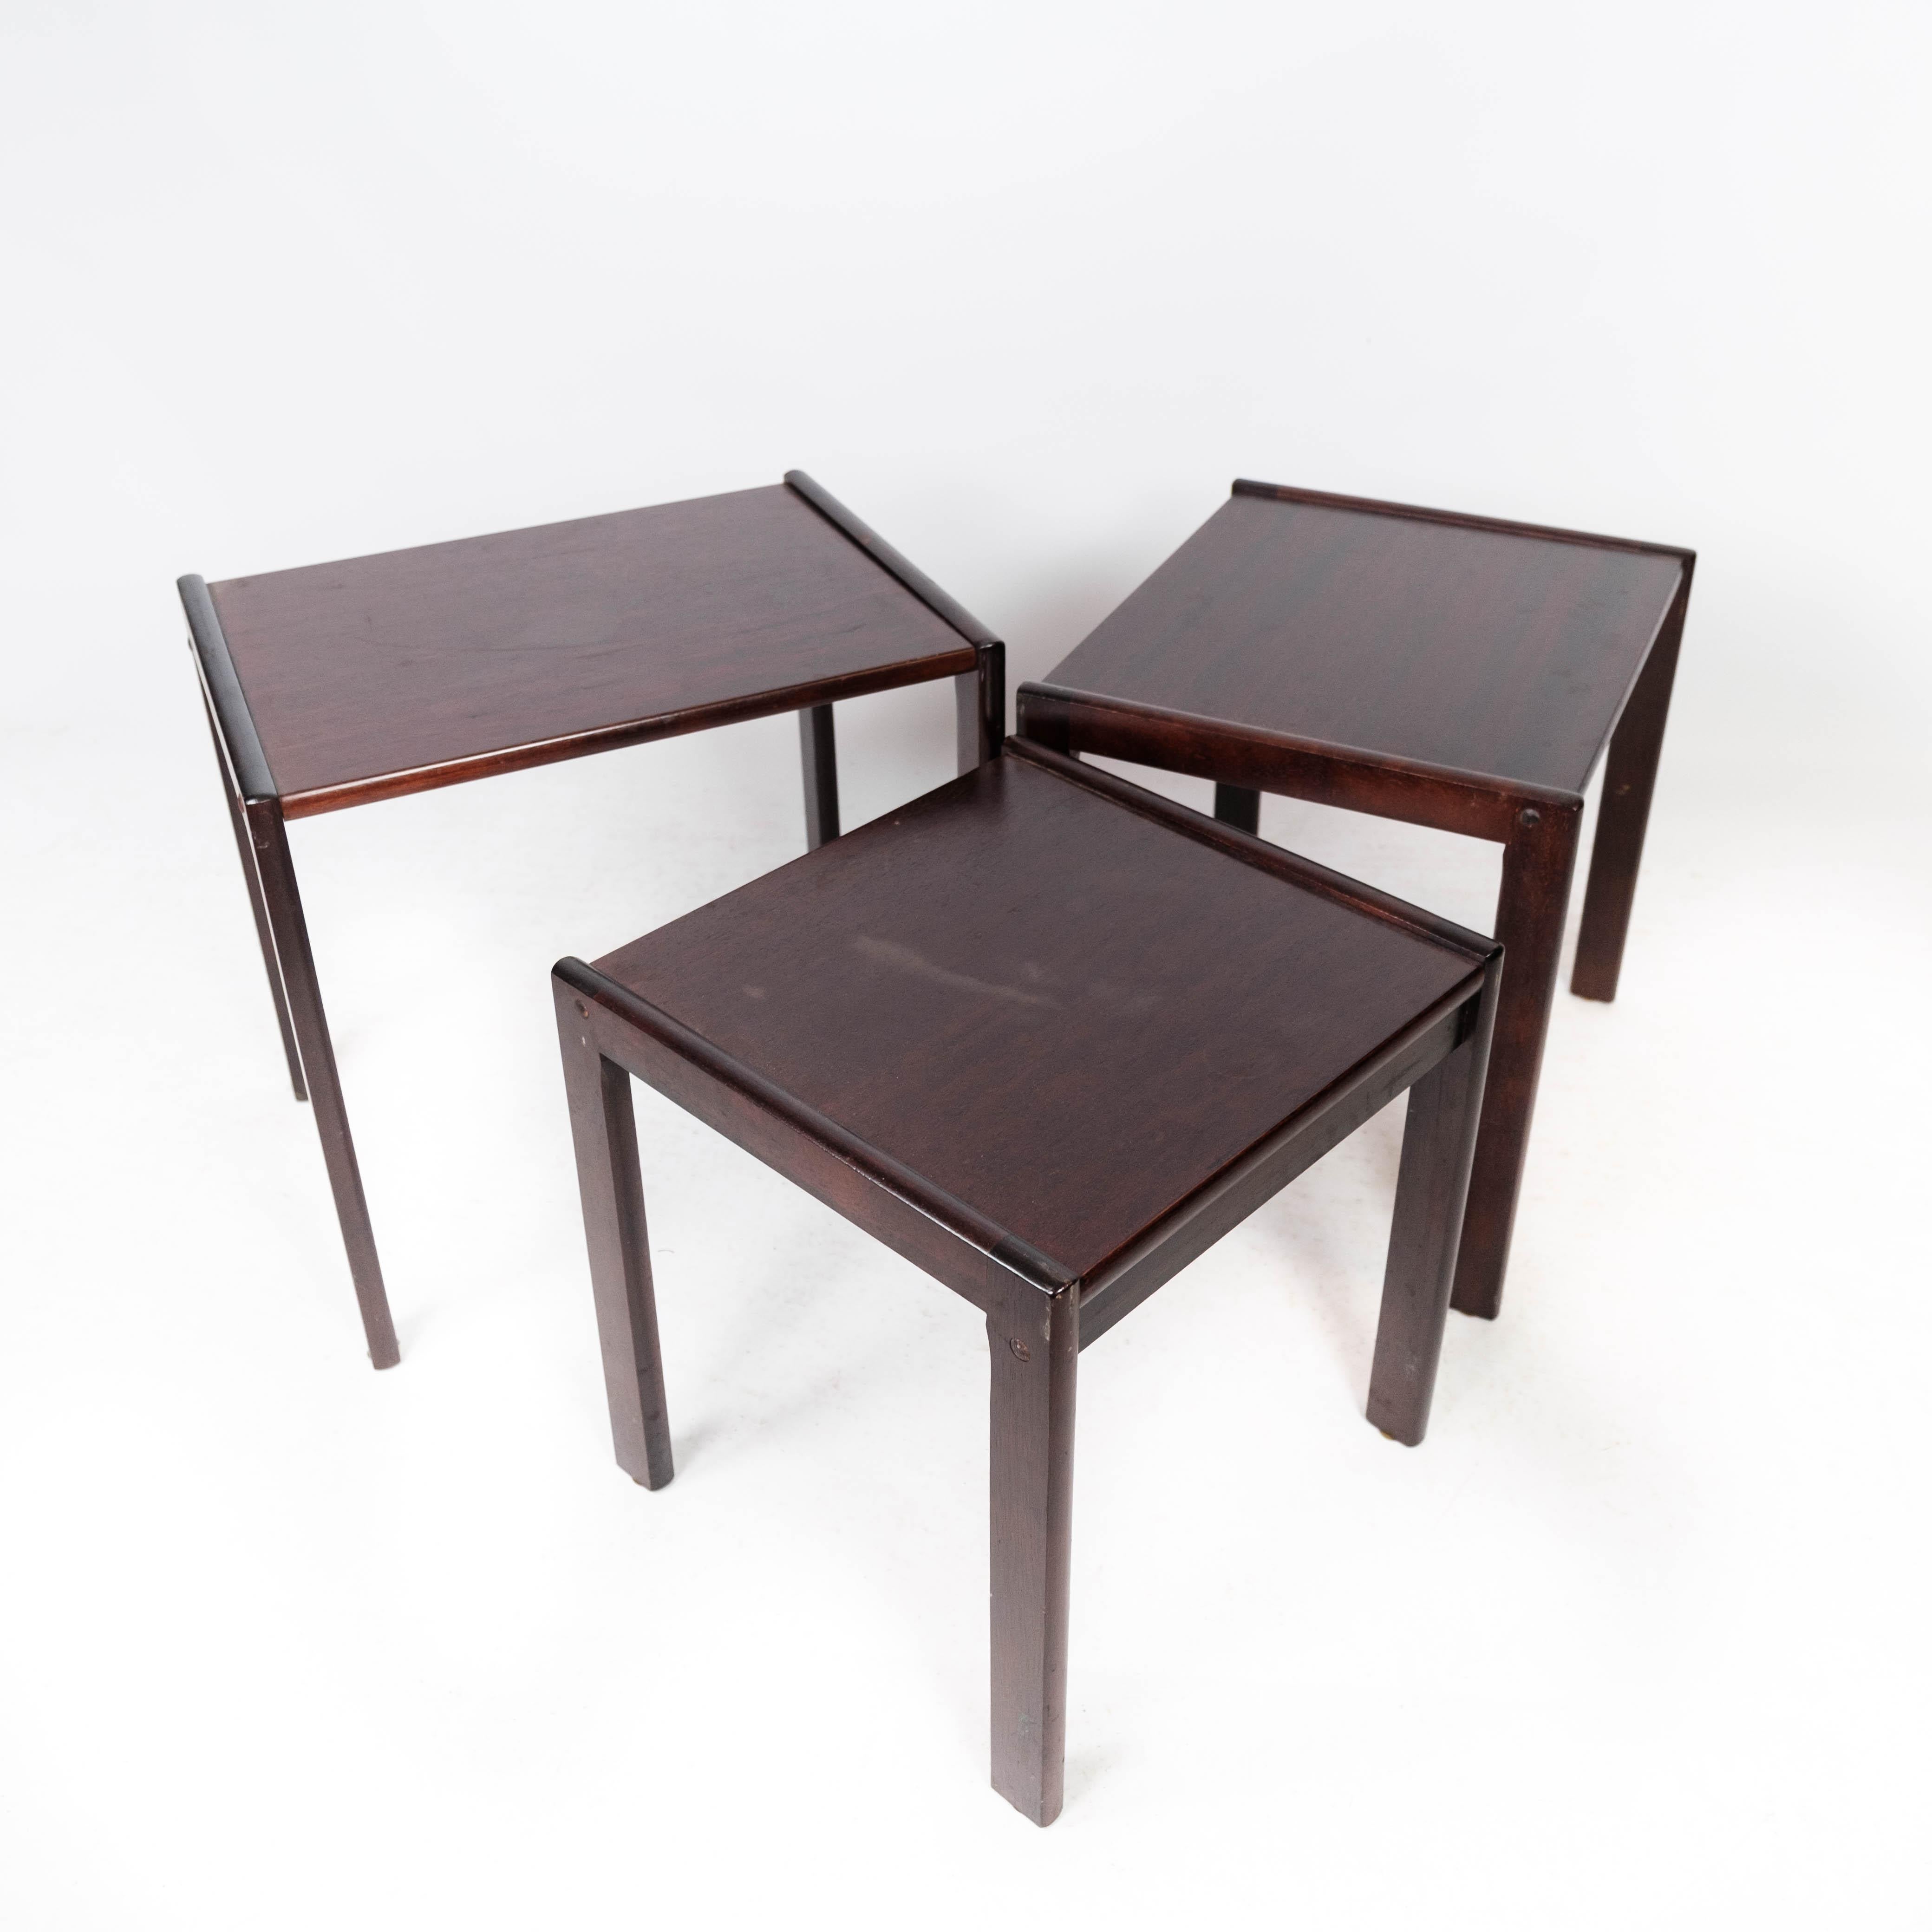 Set of Nesting Tables in Dark Wood of Danish Design from the 1960s For Sale 6